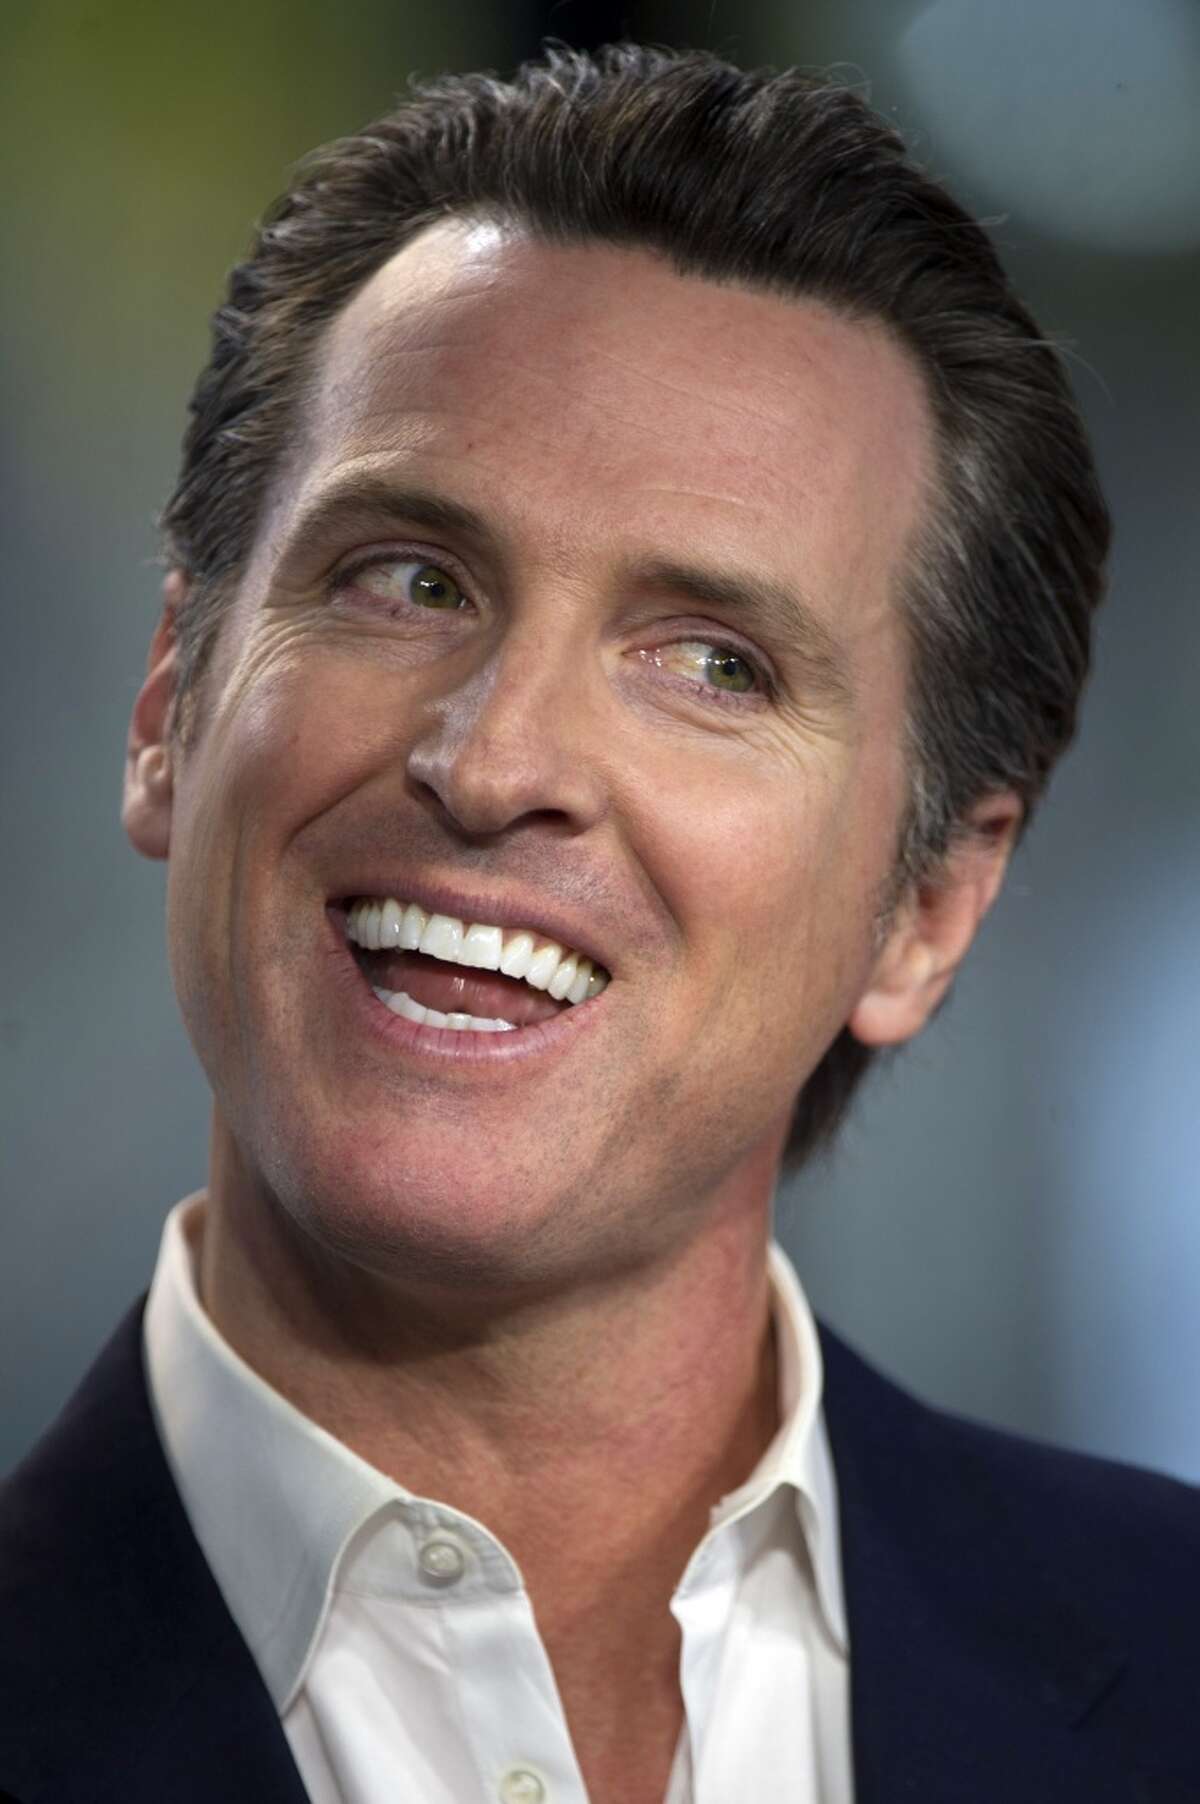 CA Lt. Gov. Gavin Newsom had an affair with the wife of his friend and campaign manager when he was mayor of San Francisco. Violation of the Man Code? Sure. But hardly a speed bump for his political career. Was re-elected as mayor in 2007 and handily won statewide office in 2010.